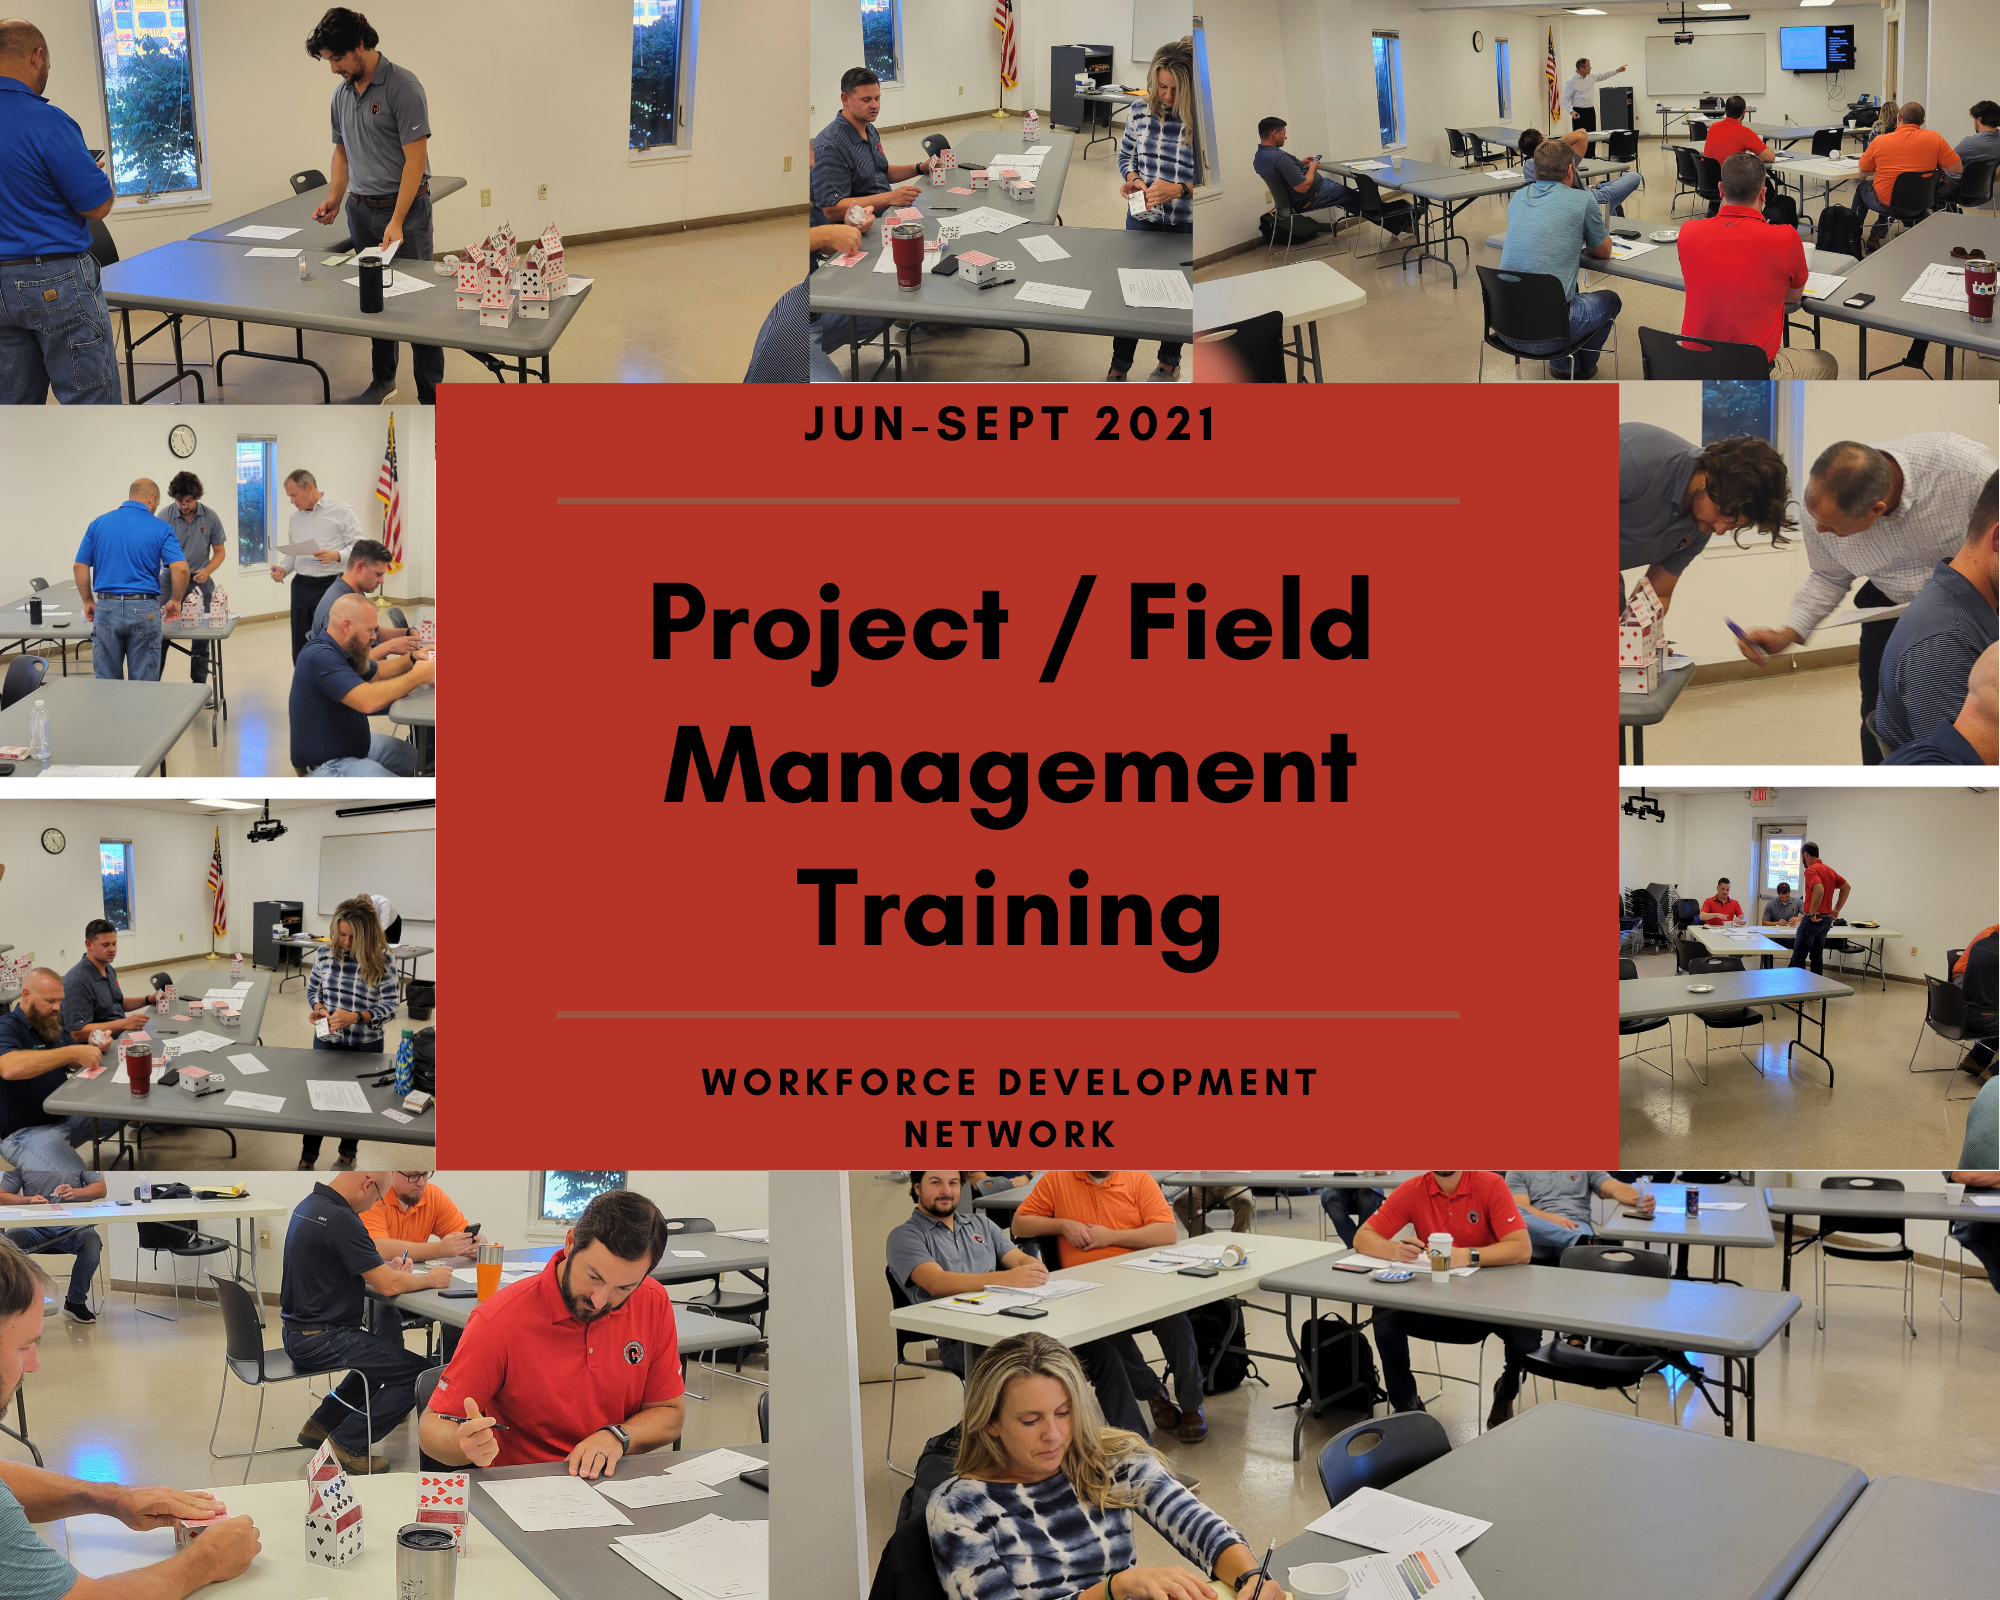 Project field management training